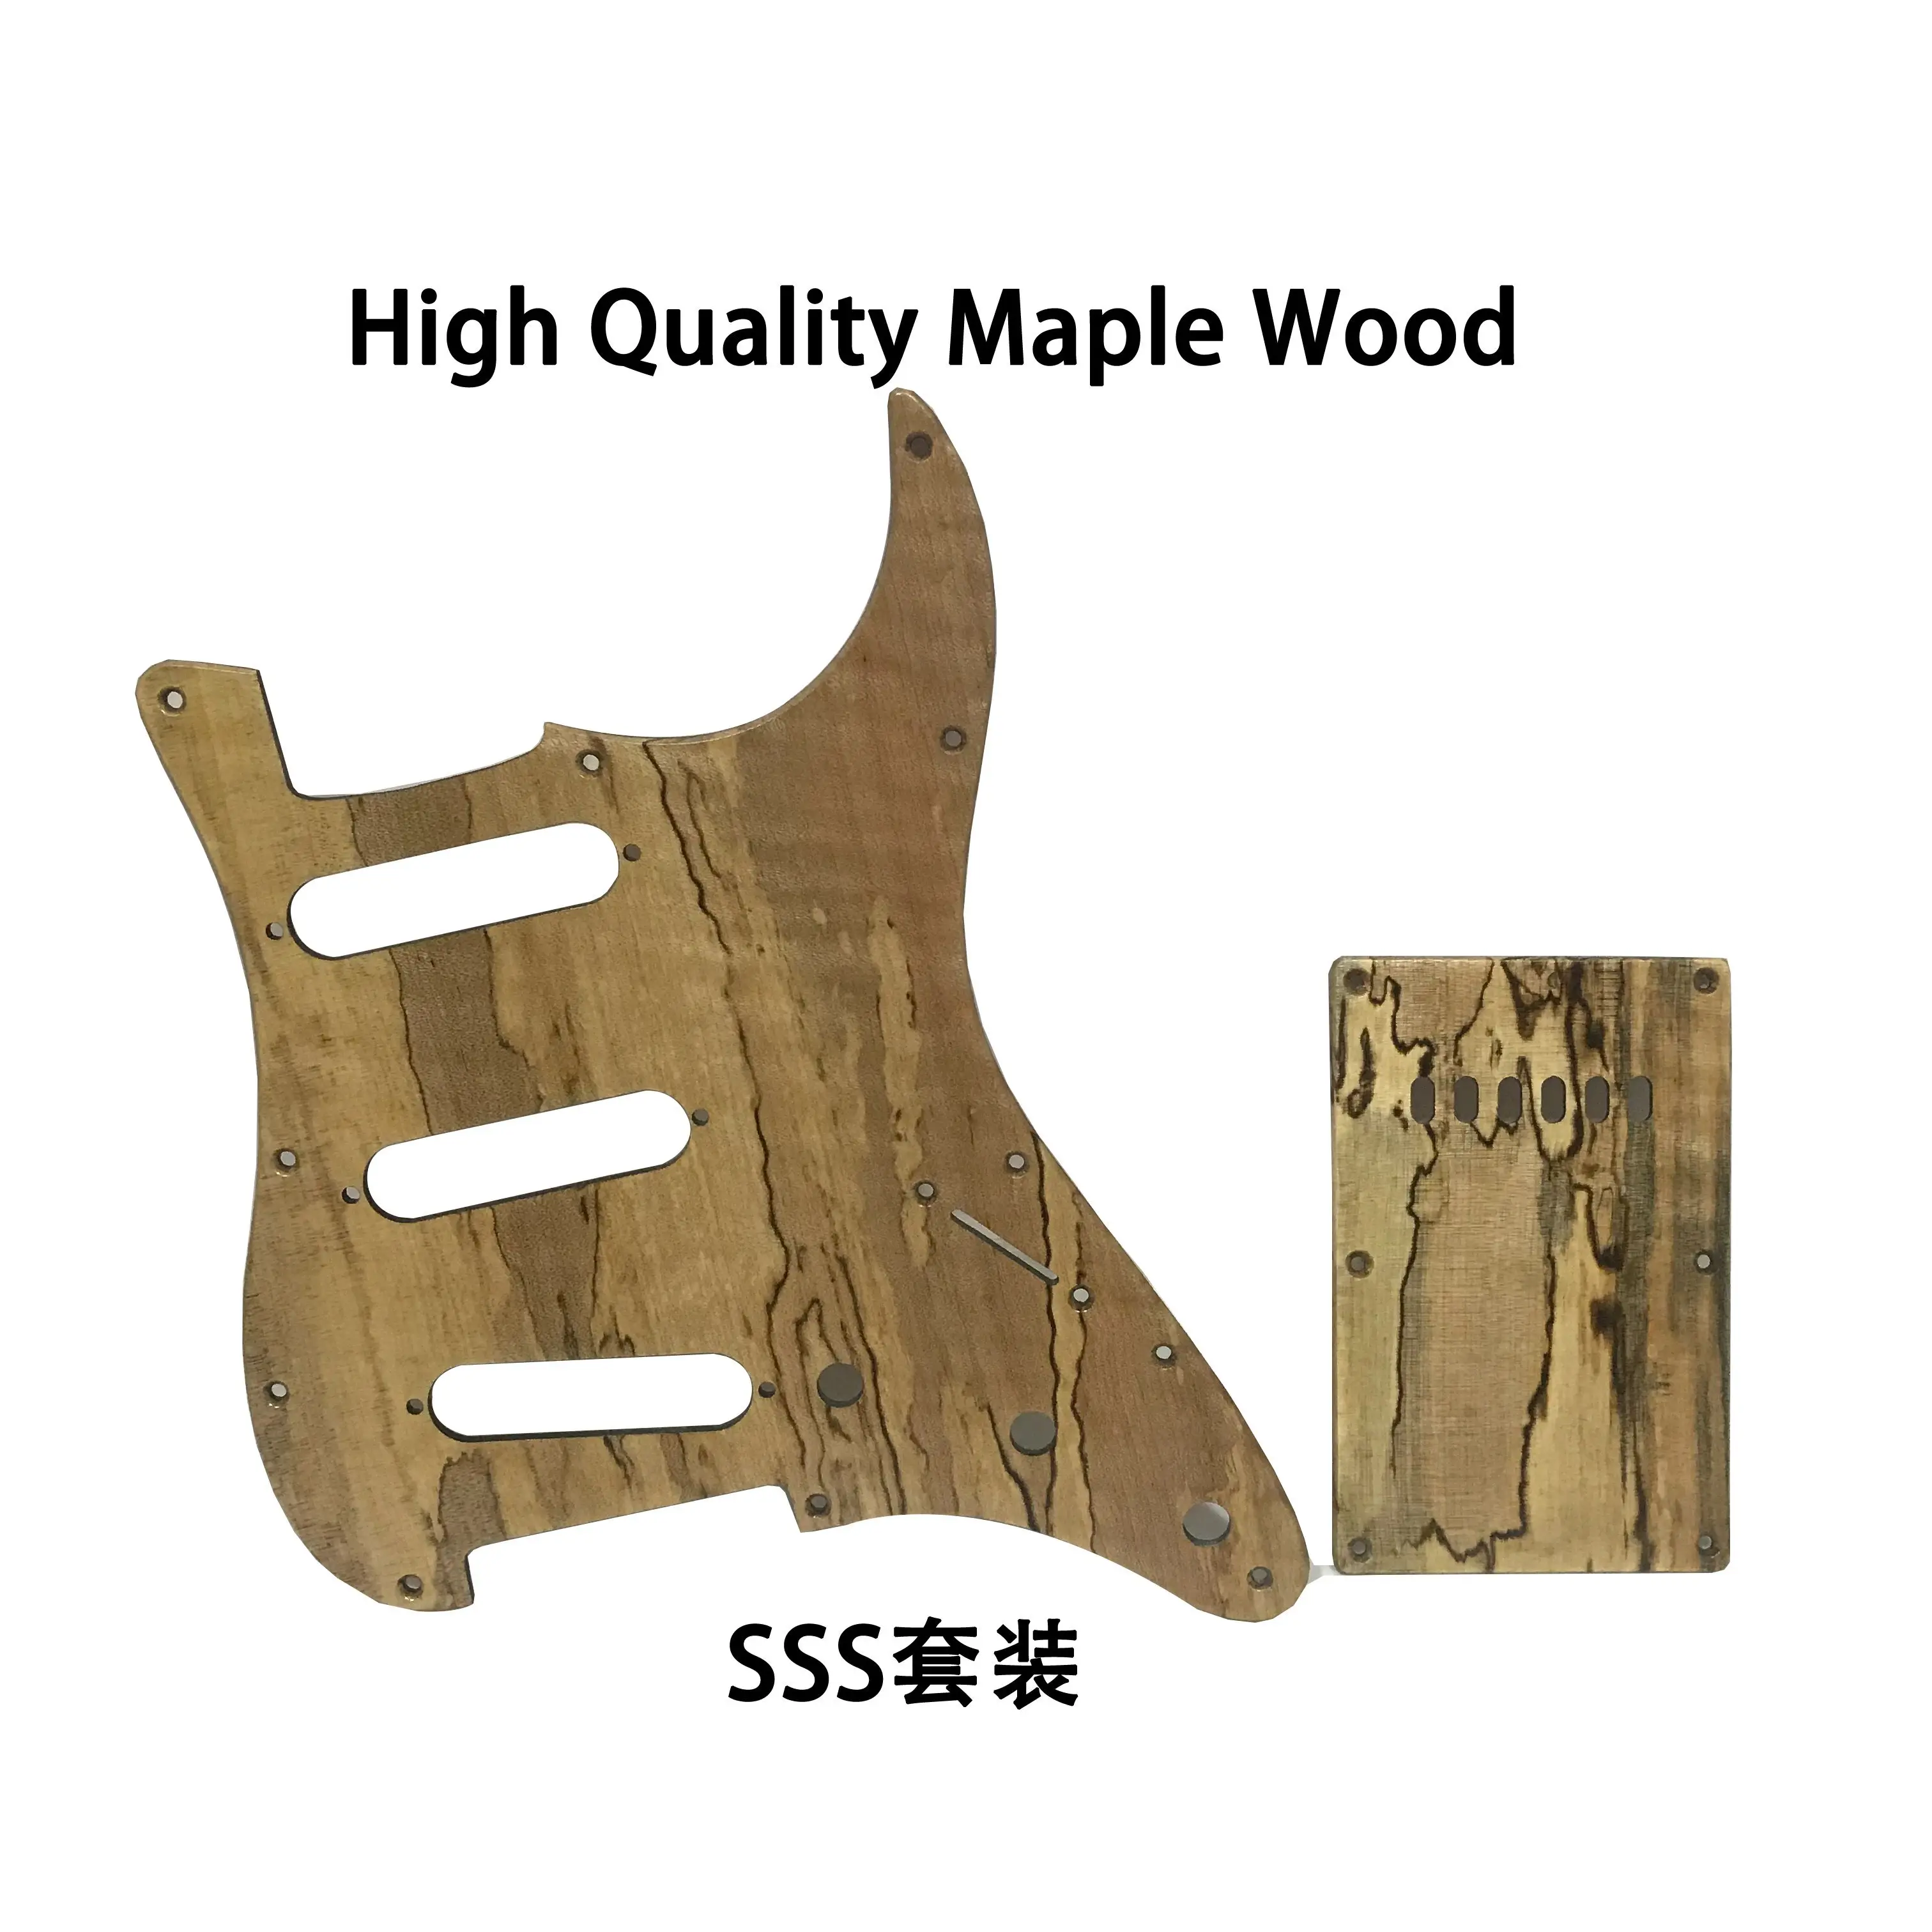 10 Pcs 11holes SSS Spalted Maple ST .Electric Guitar Pickguard Back Plate Solid Wood for Fender Style Guitar Accessories enlarge